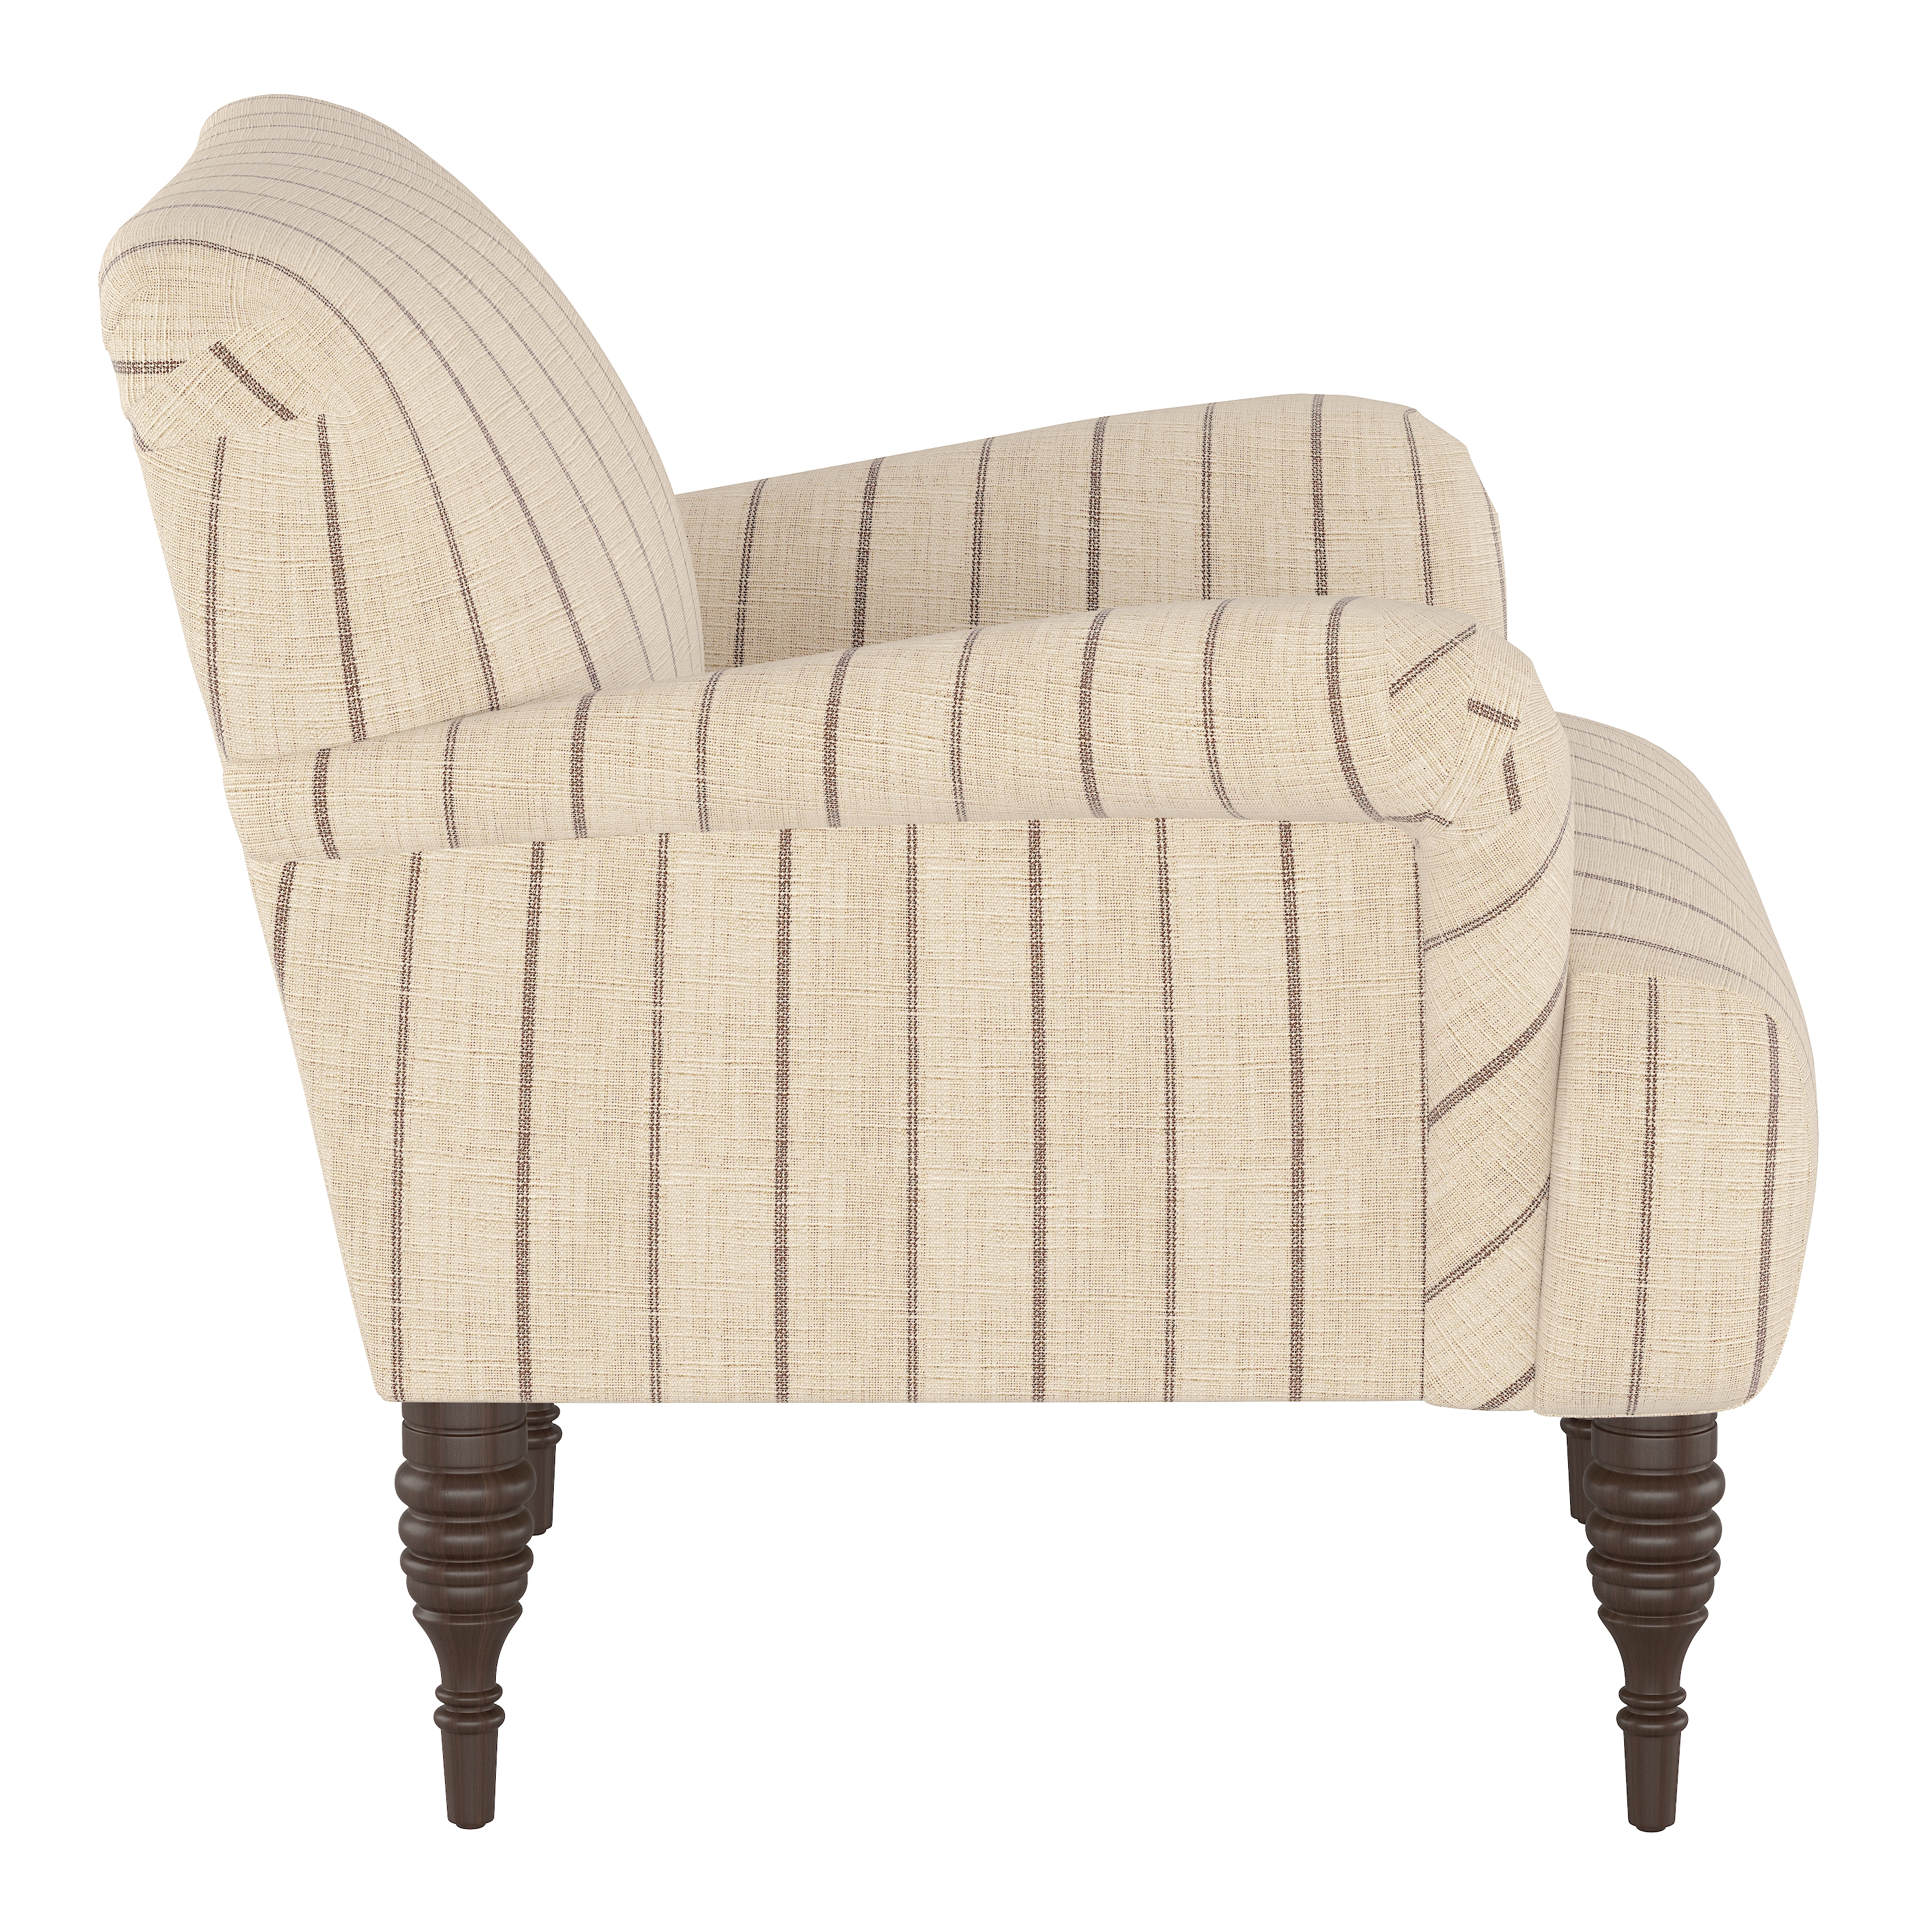 Vyolet Accent Chair - Image 2